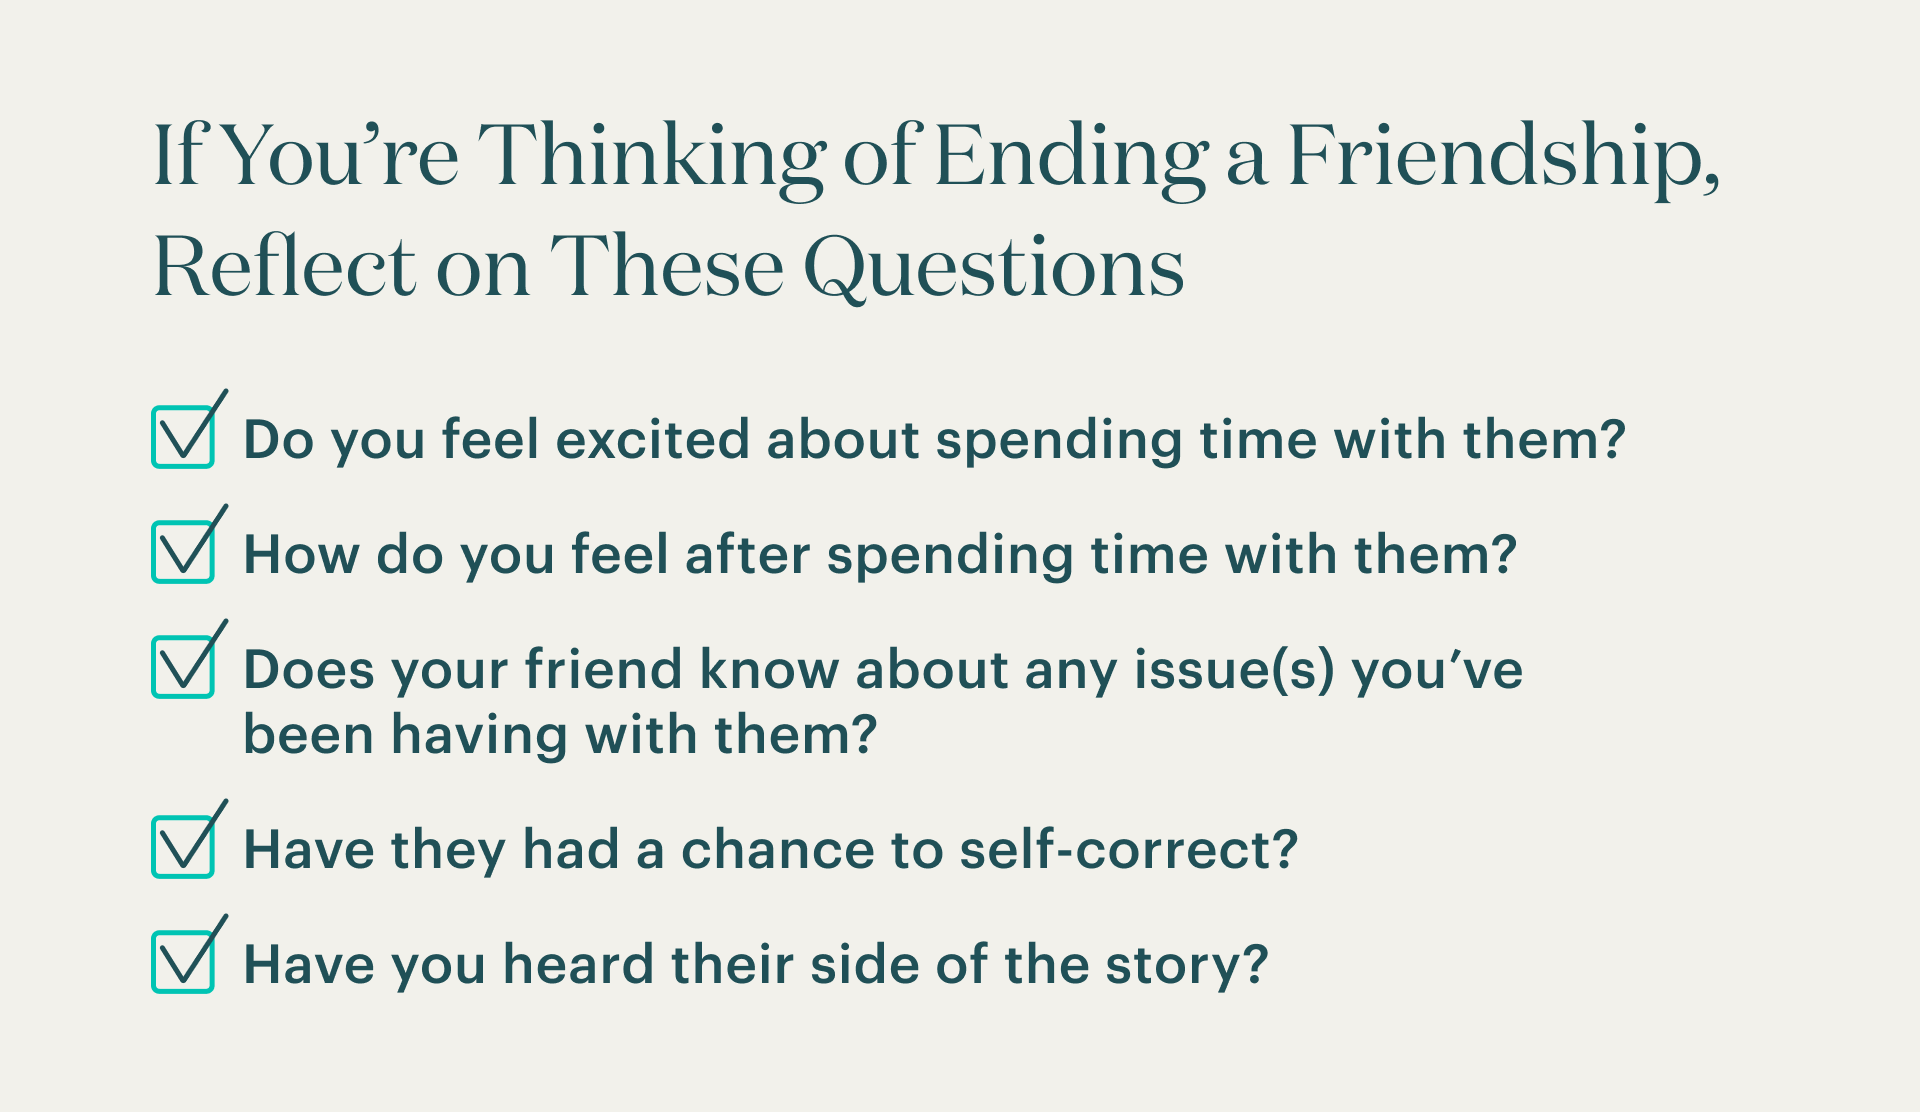 A list of questions to reflect on when considering ending a friendship